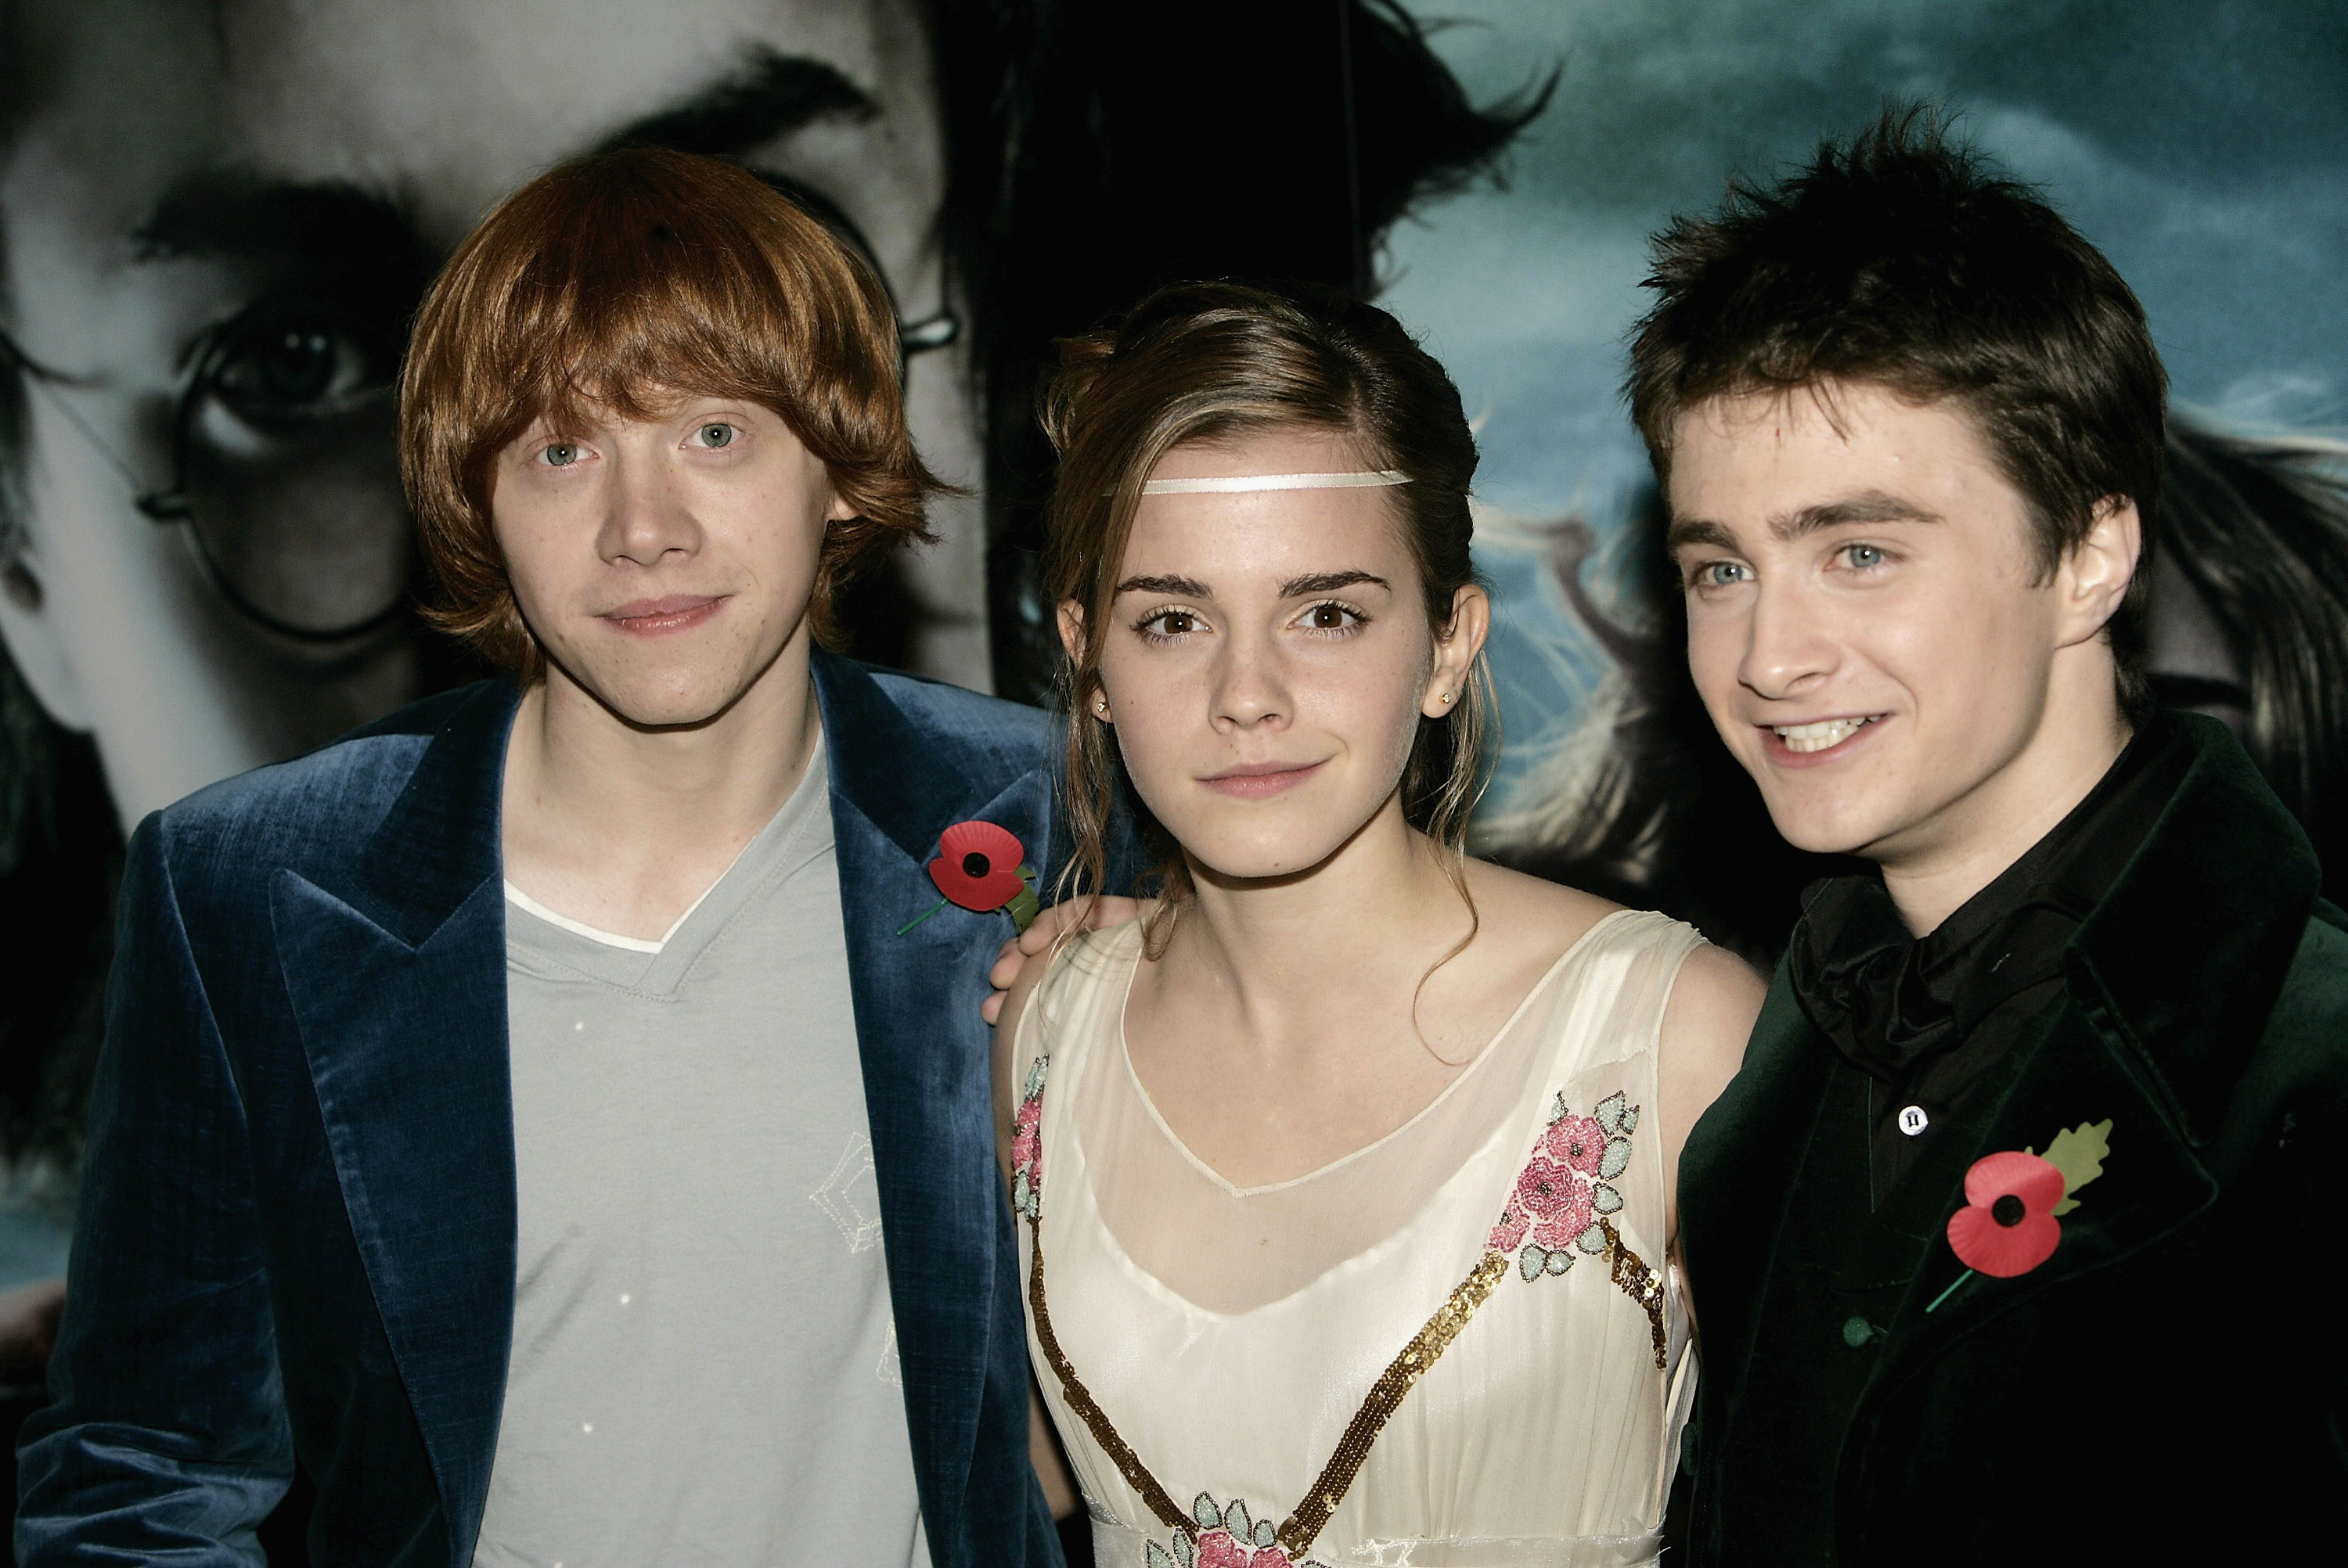 Actors Rupert Grint, Emma Watson and Daniel Radcliffe arrive at the World Premiere of "Harry Potter And The Goblet Of Fire" at the Odeon Leicester Square on November 6, 2005 in London, England. | Source: Getty Images